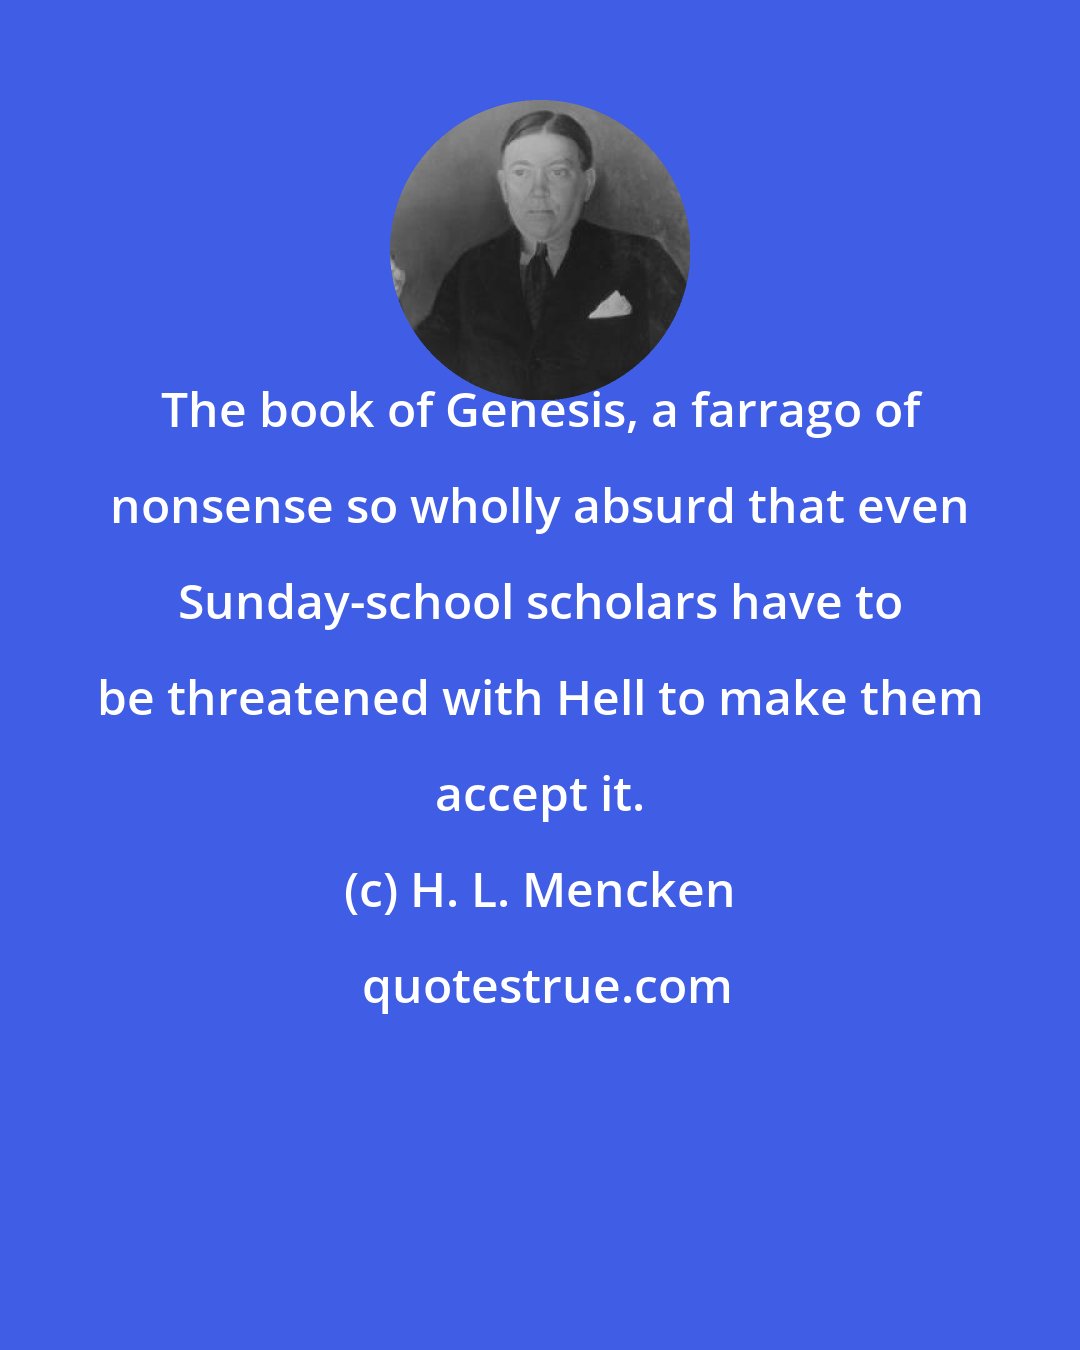 H. L. Mencken: The book of Genesis, a farrago of nonsense so wholly absurd that even Sunday-school scholars have to be threatened with Hell to make them accept it.